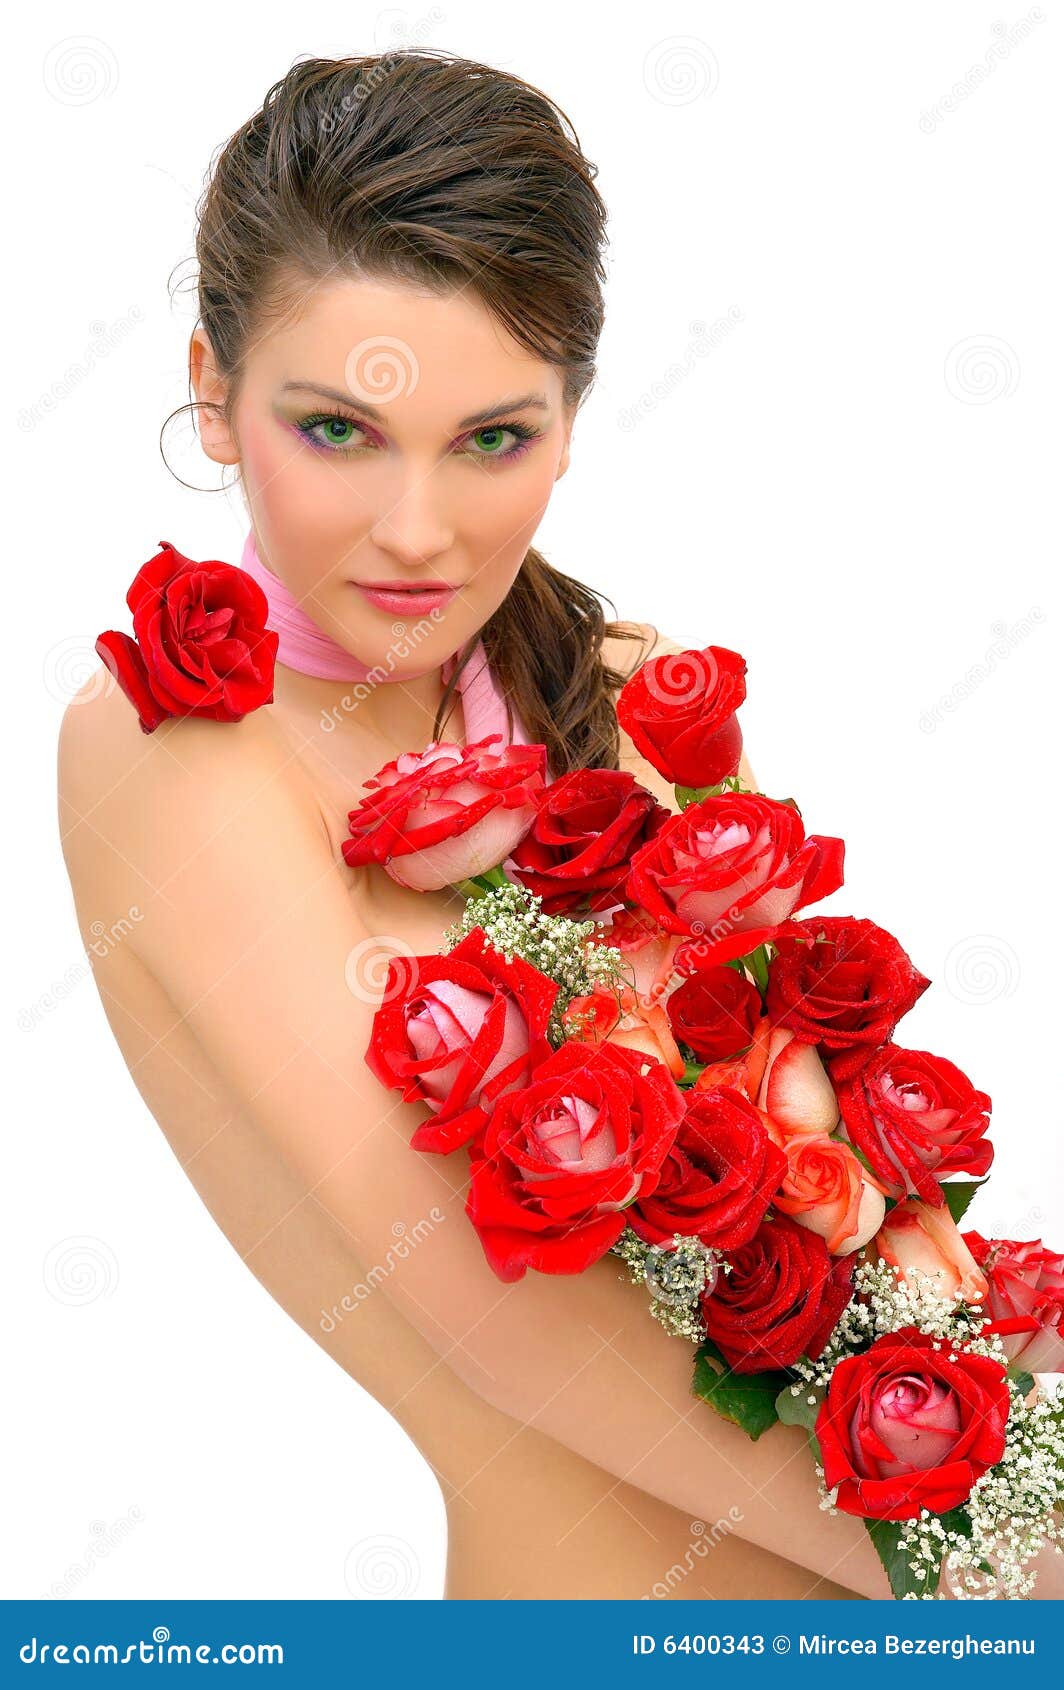 Beautiful girl with roses stock image. Image of look, cosmetics ...